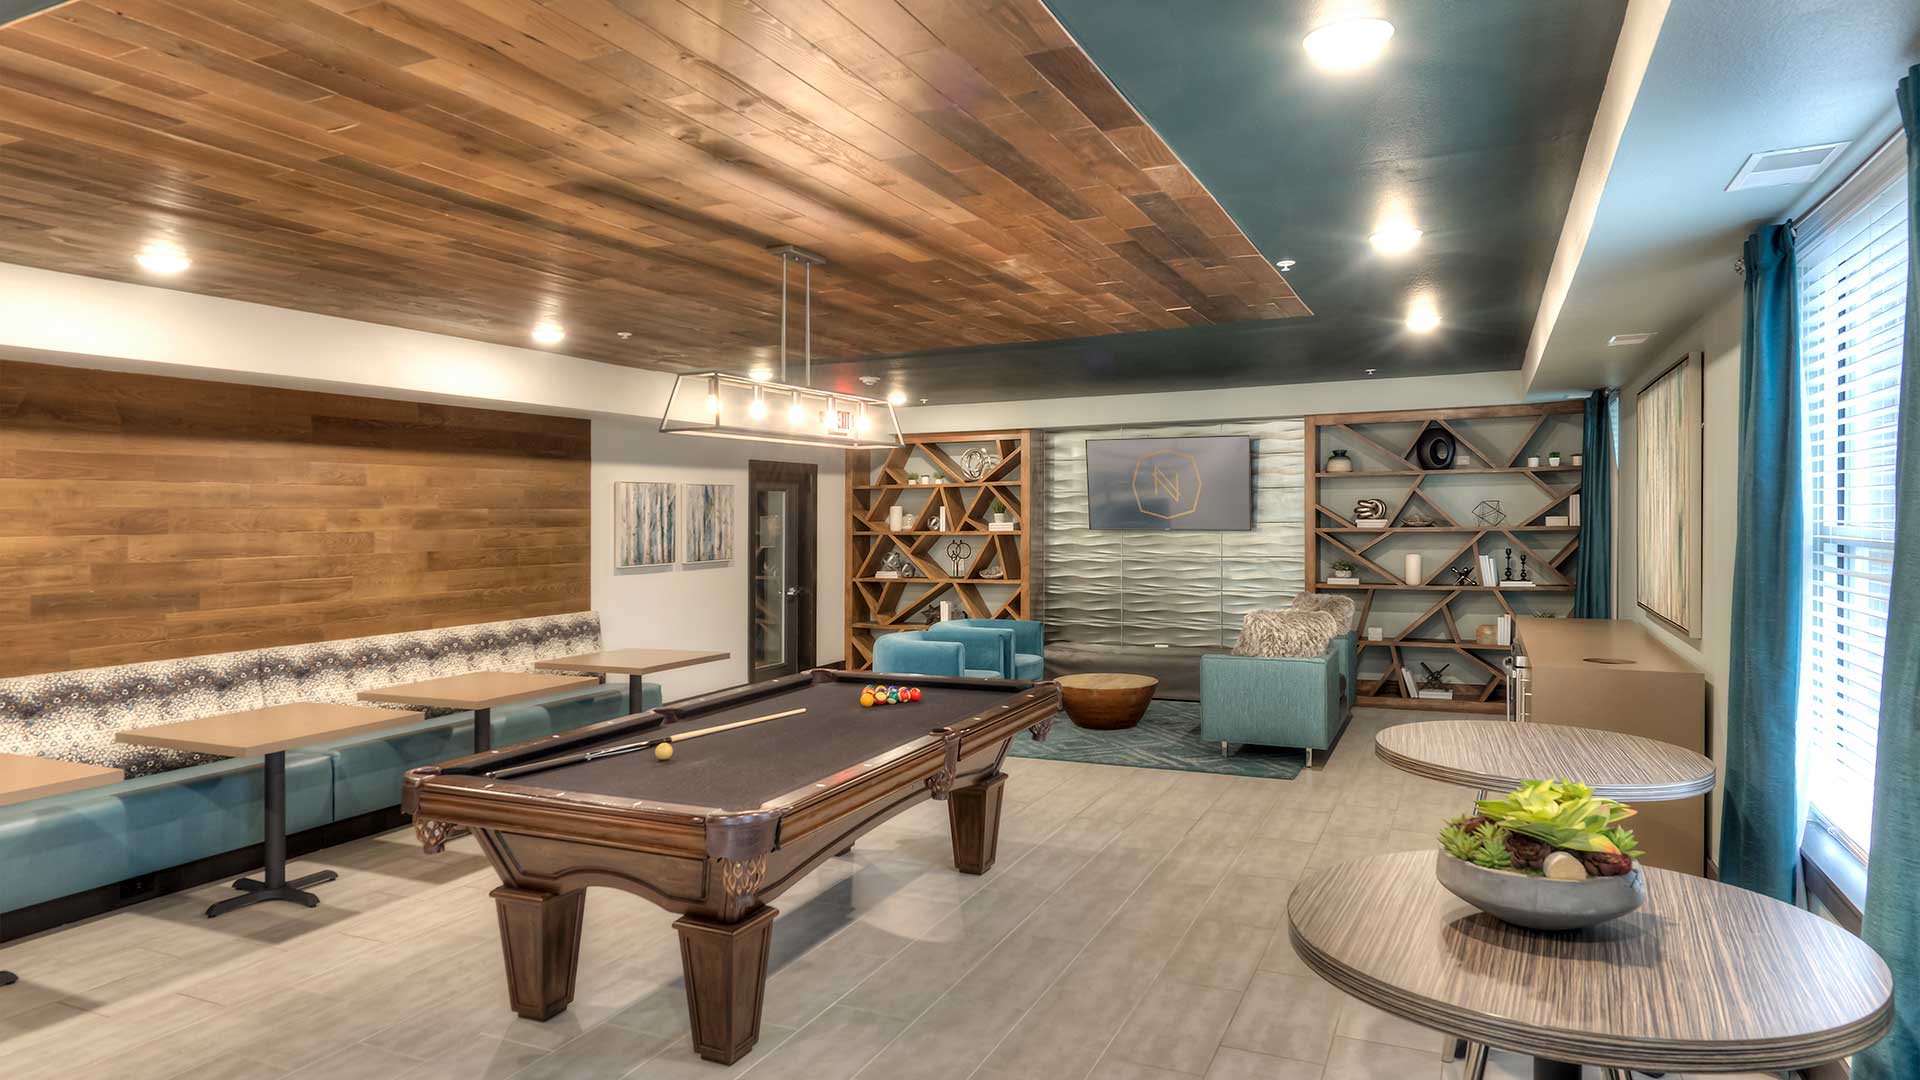 There is a pool table in the middle of the room. The far-left wall has bench seating with tables. The back wall is a seating area with couches. Café tables line the right wall near the camera.